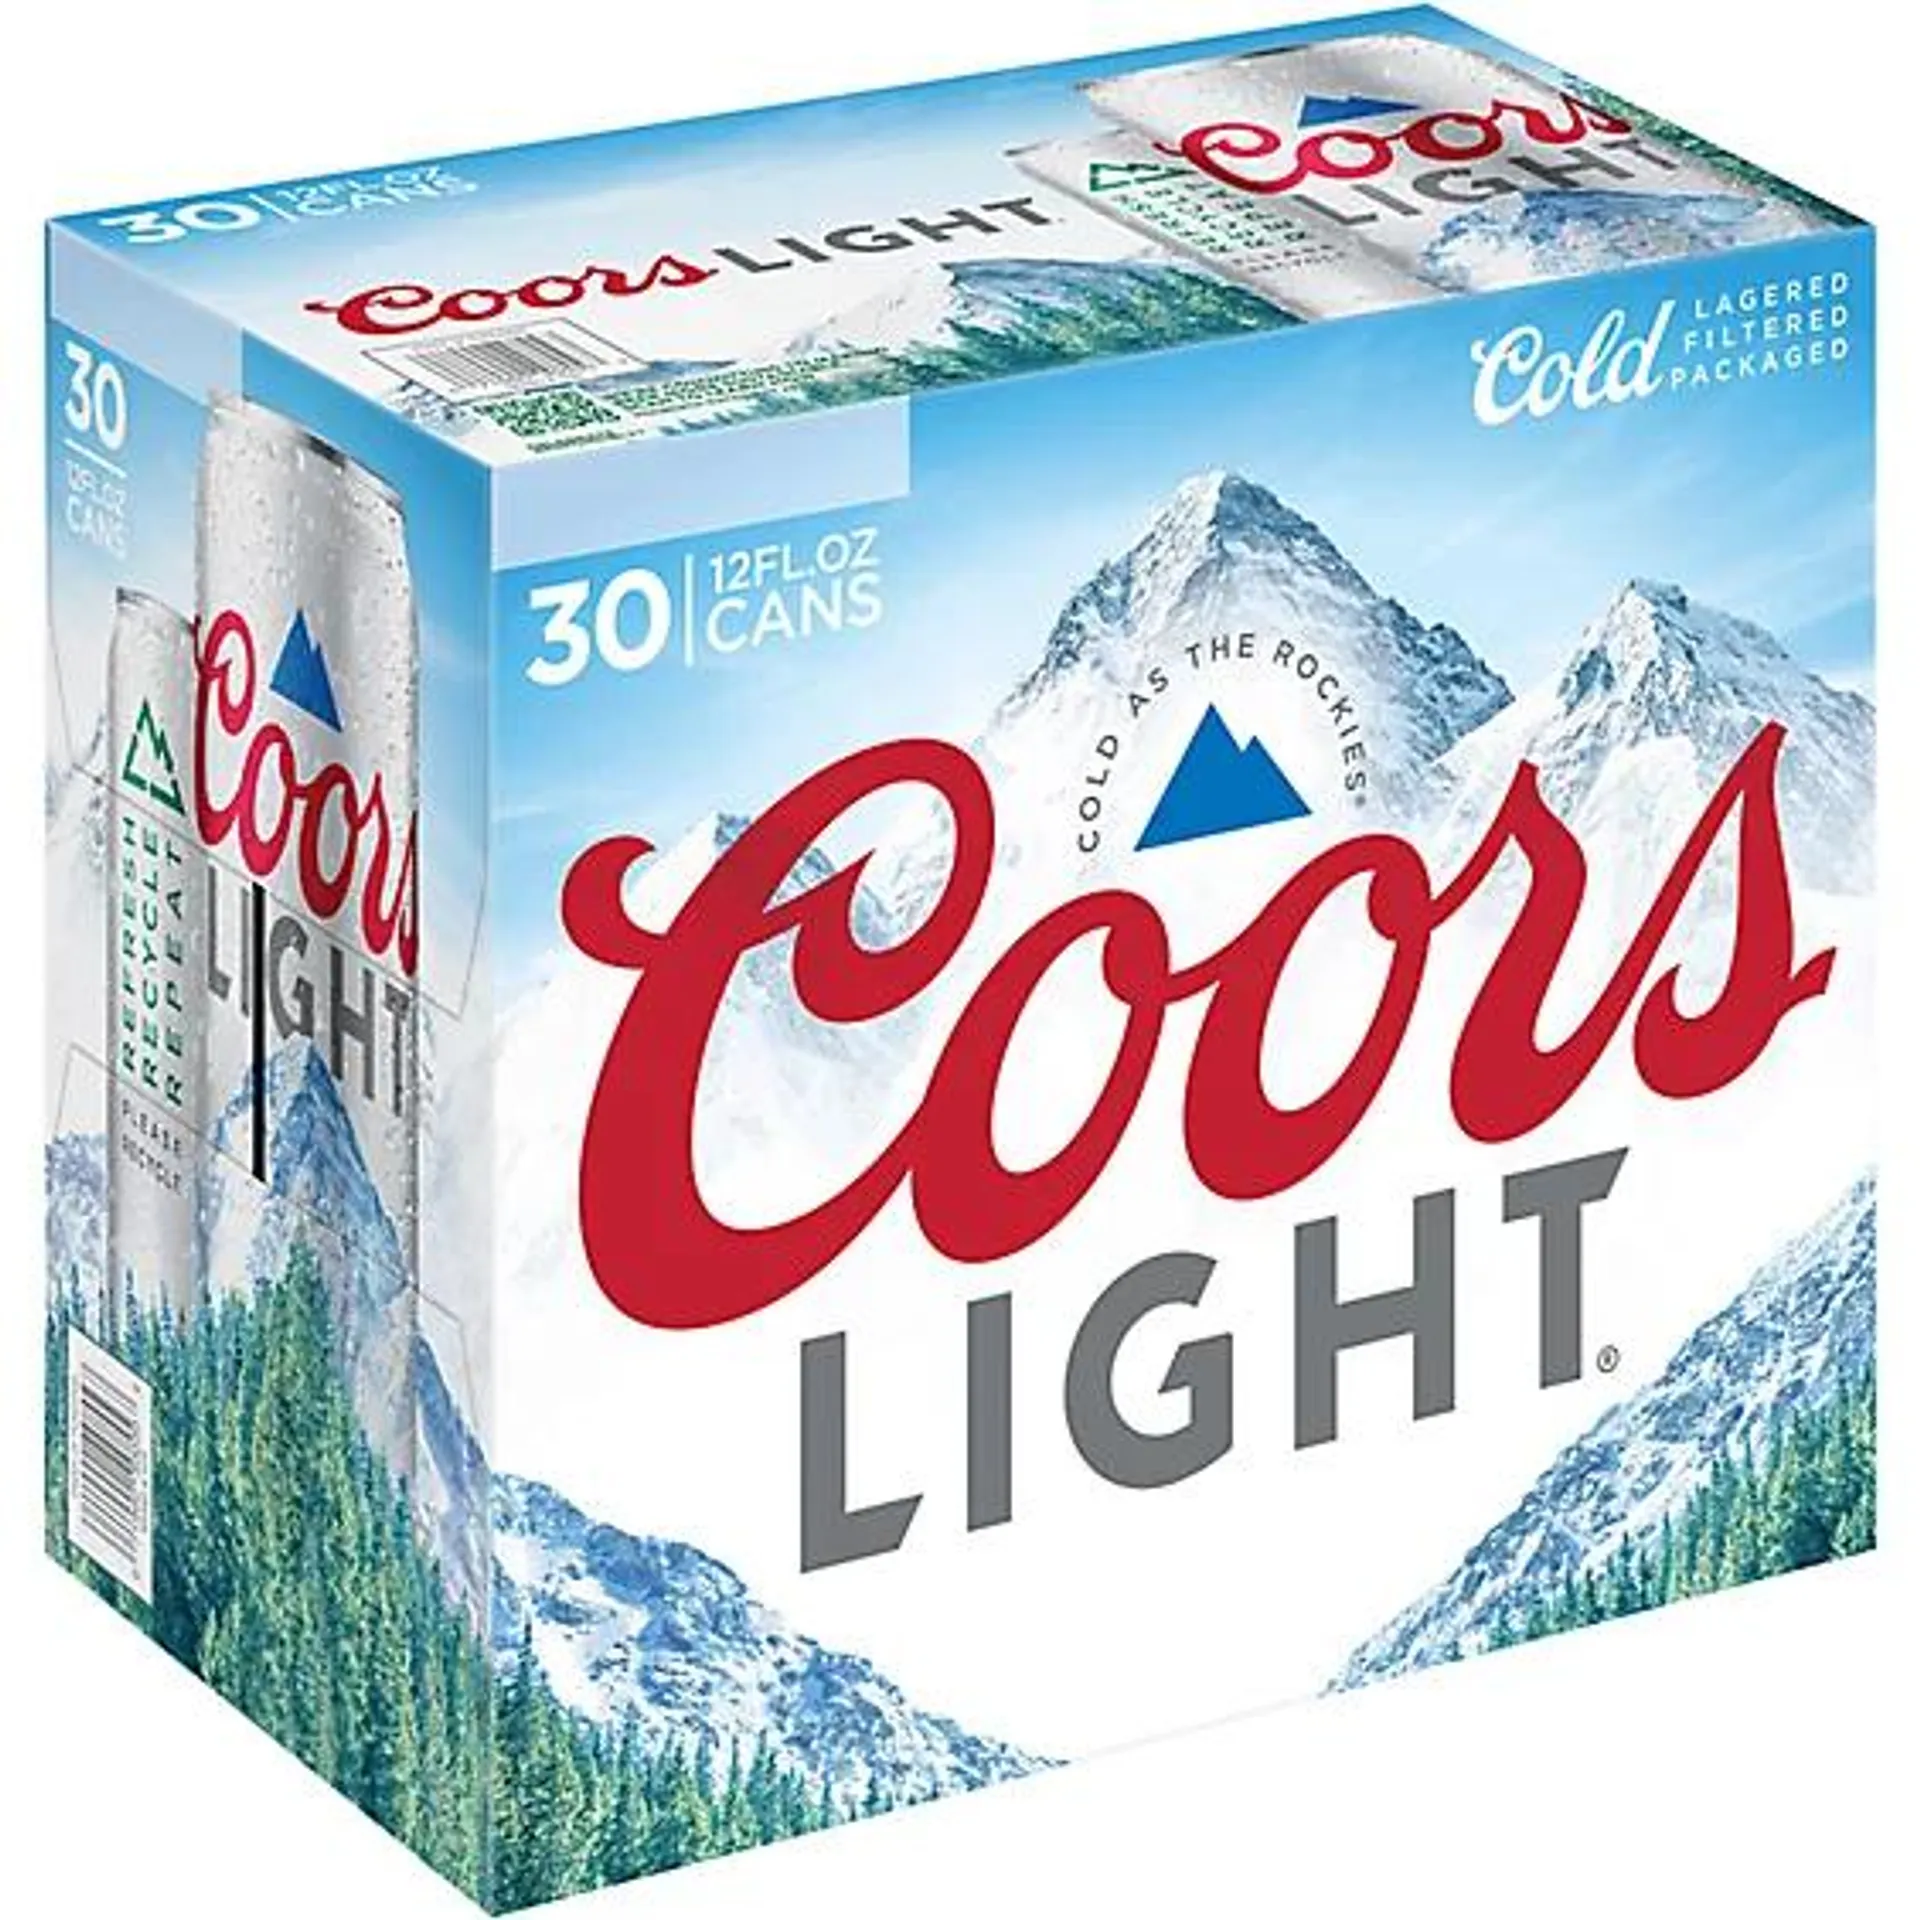 Coors Light Beer American Styl... Cans - 30-12 Fl. Oz.